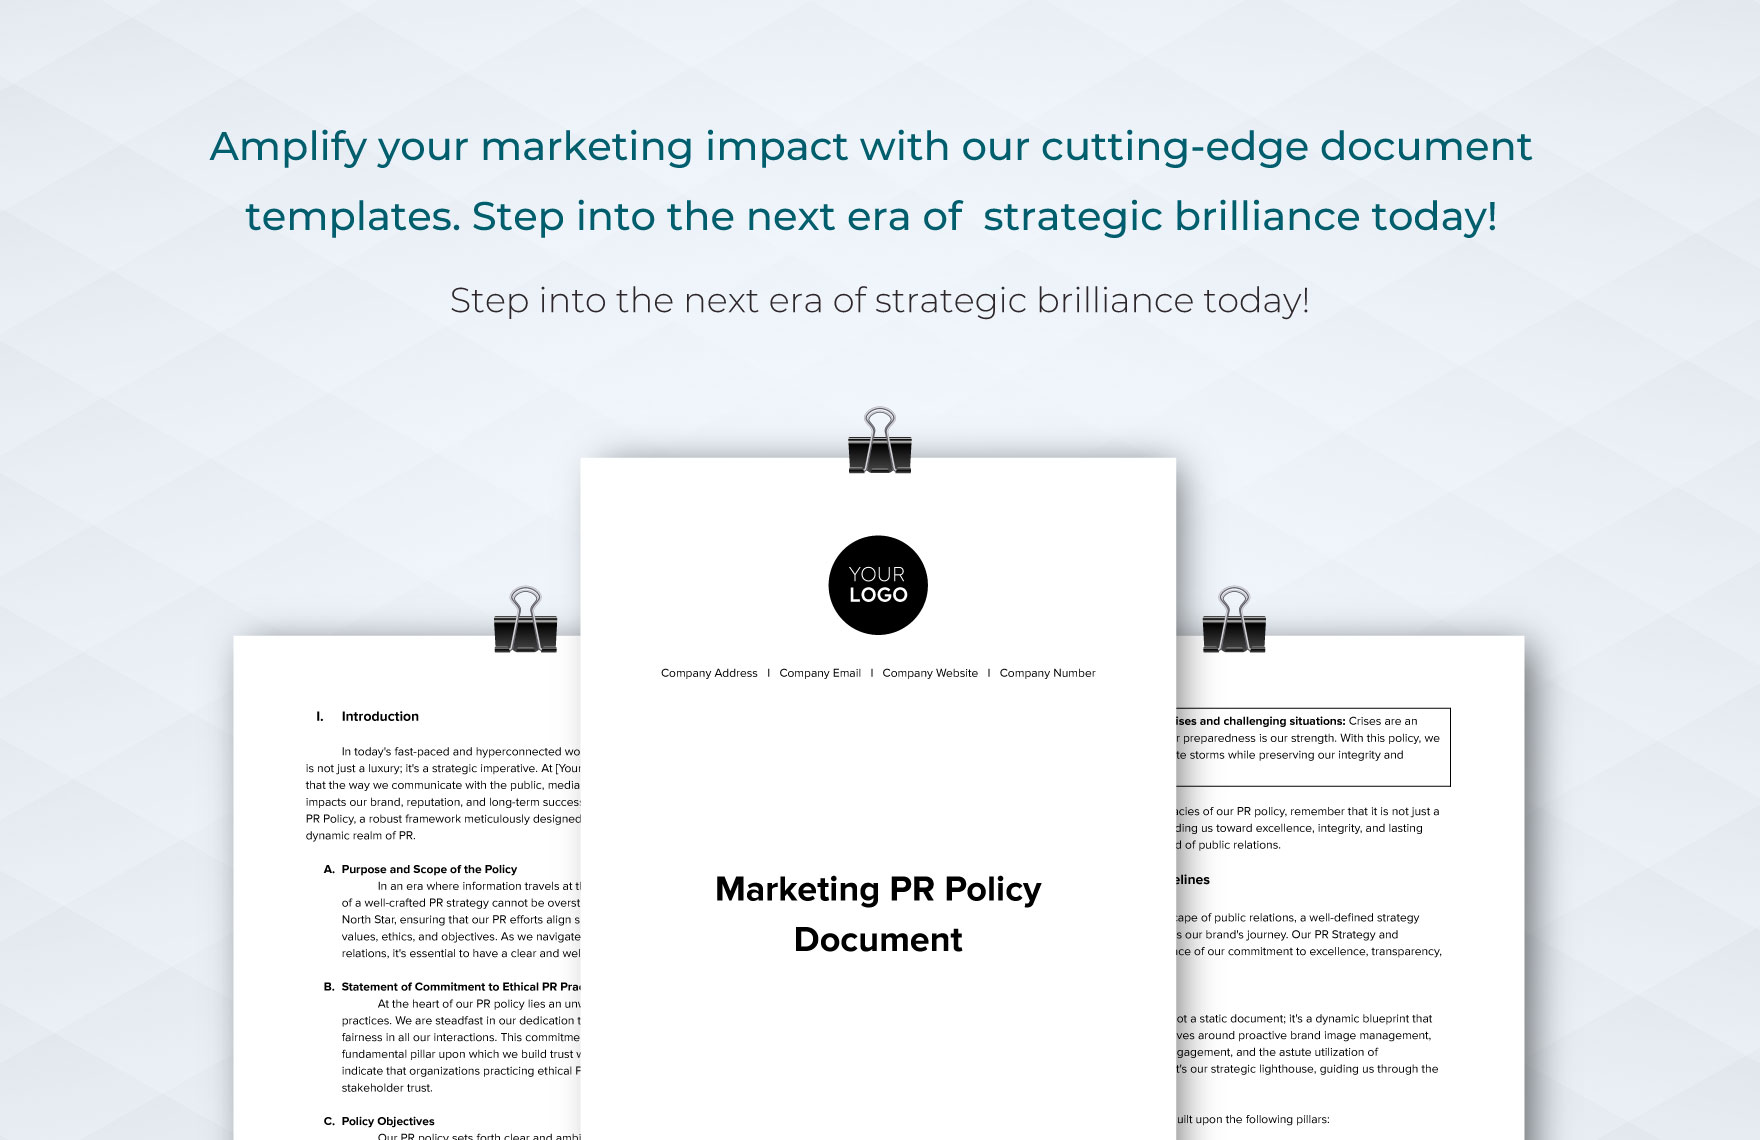 Marketing PR Policy Document Template